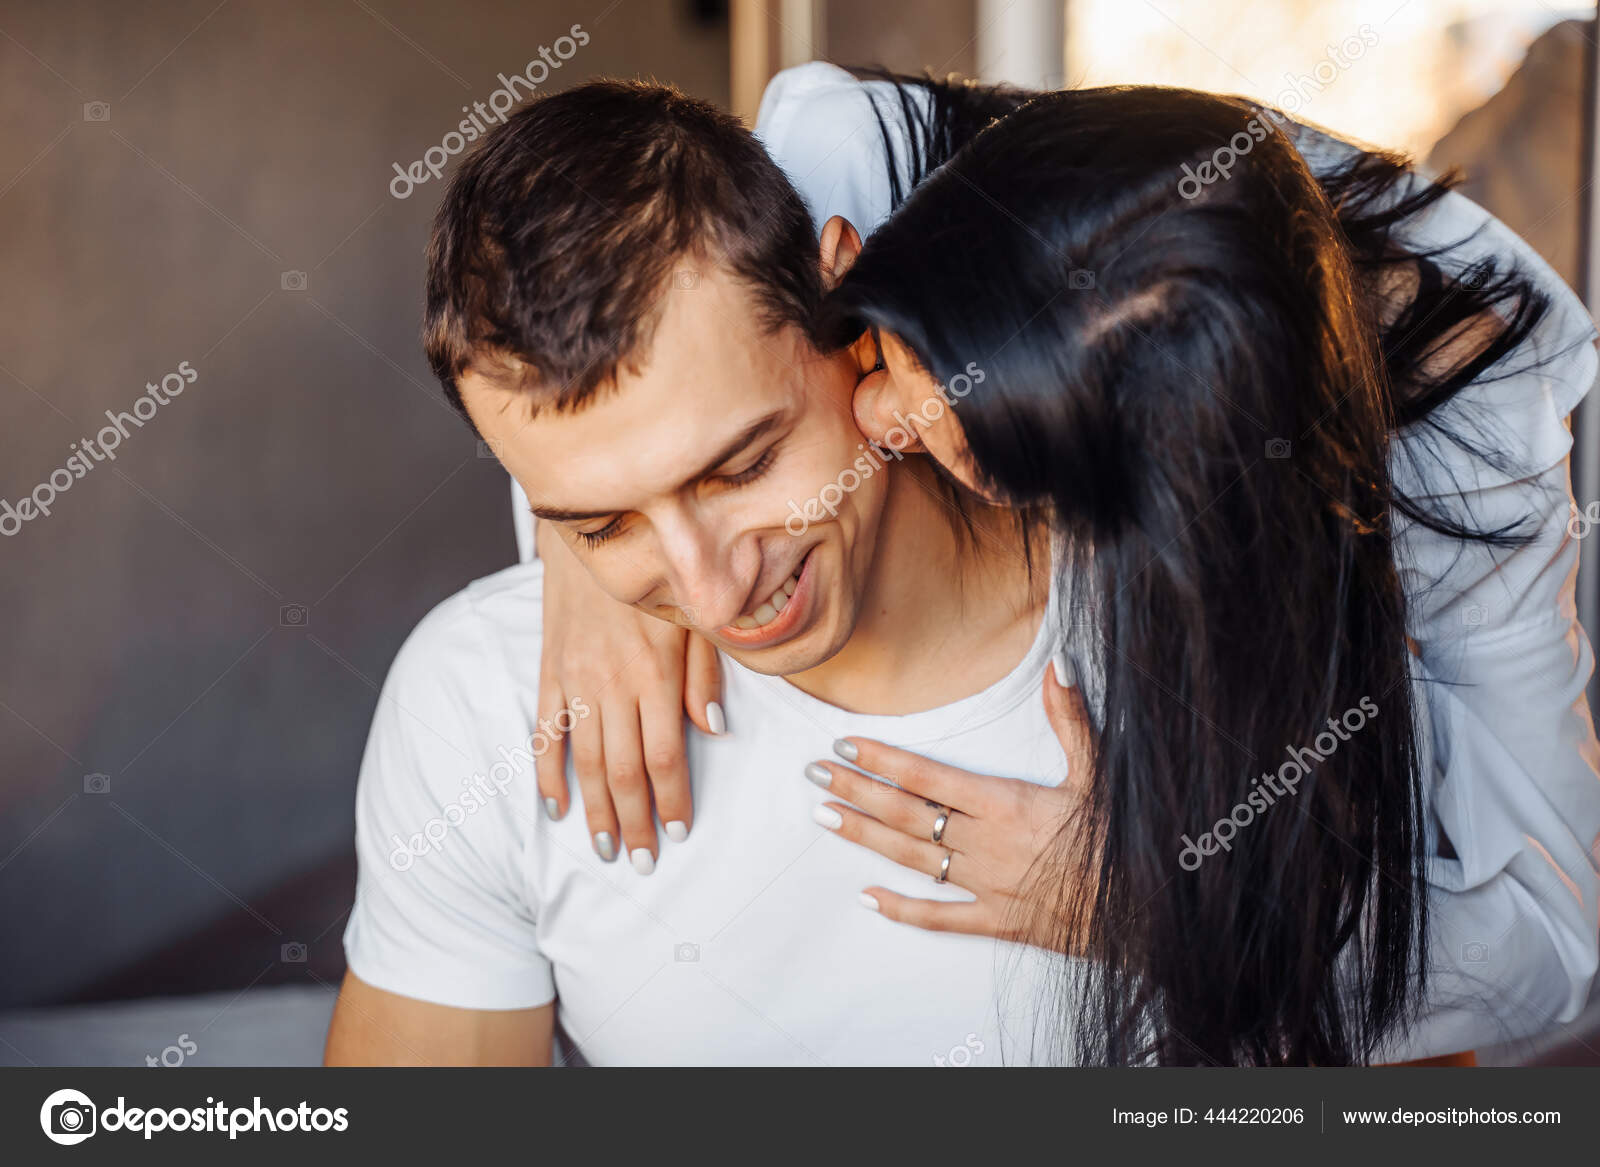 Passionate Woman Hugging Man Tenderly Kissing Him Romantically Young Gentle Stock Photo by ©dariaagaf 444220206